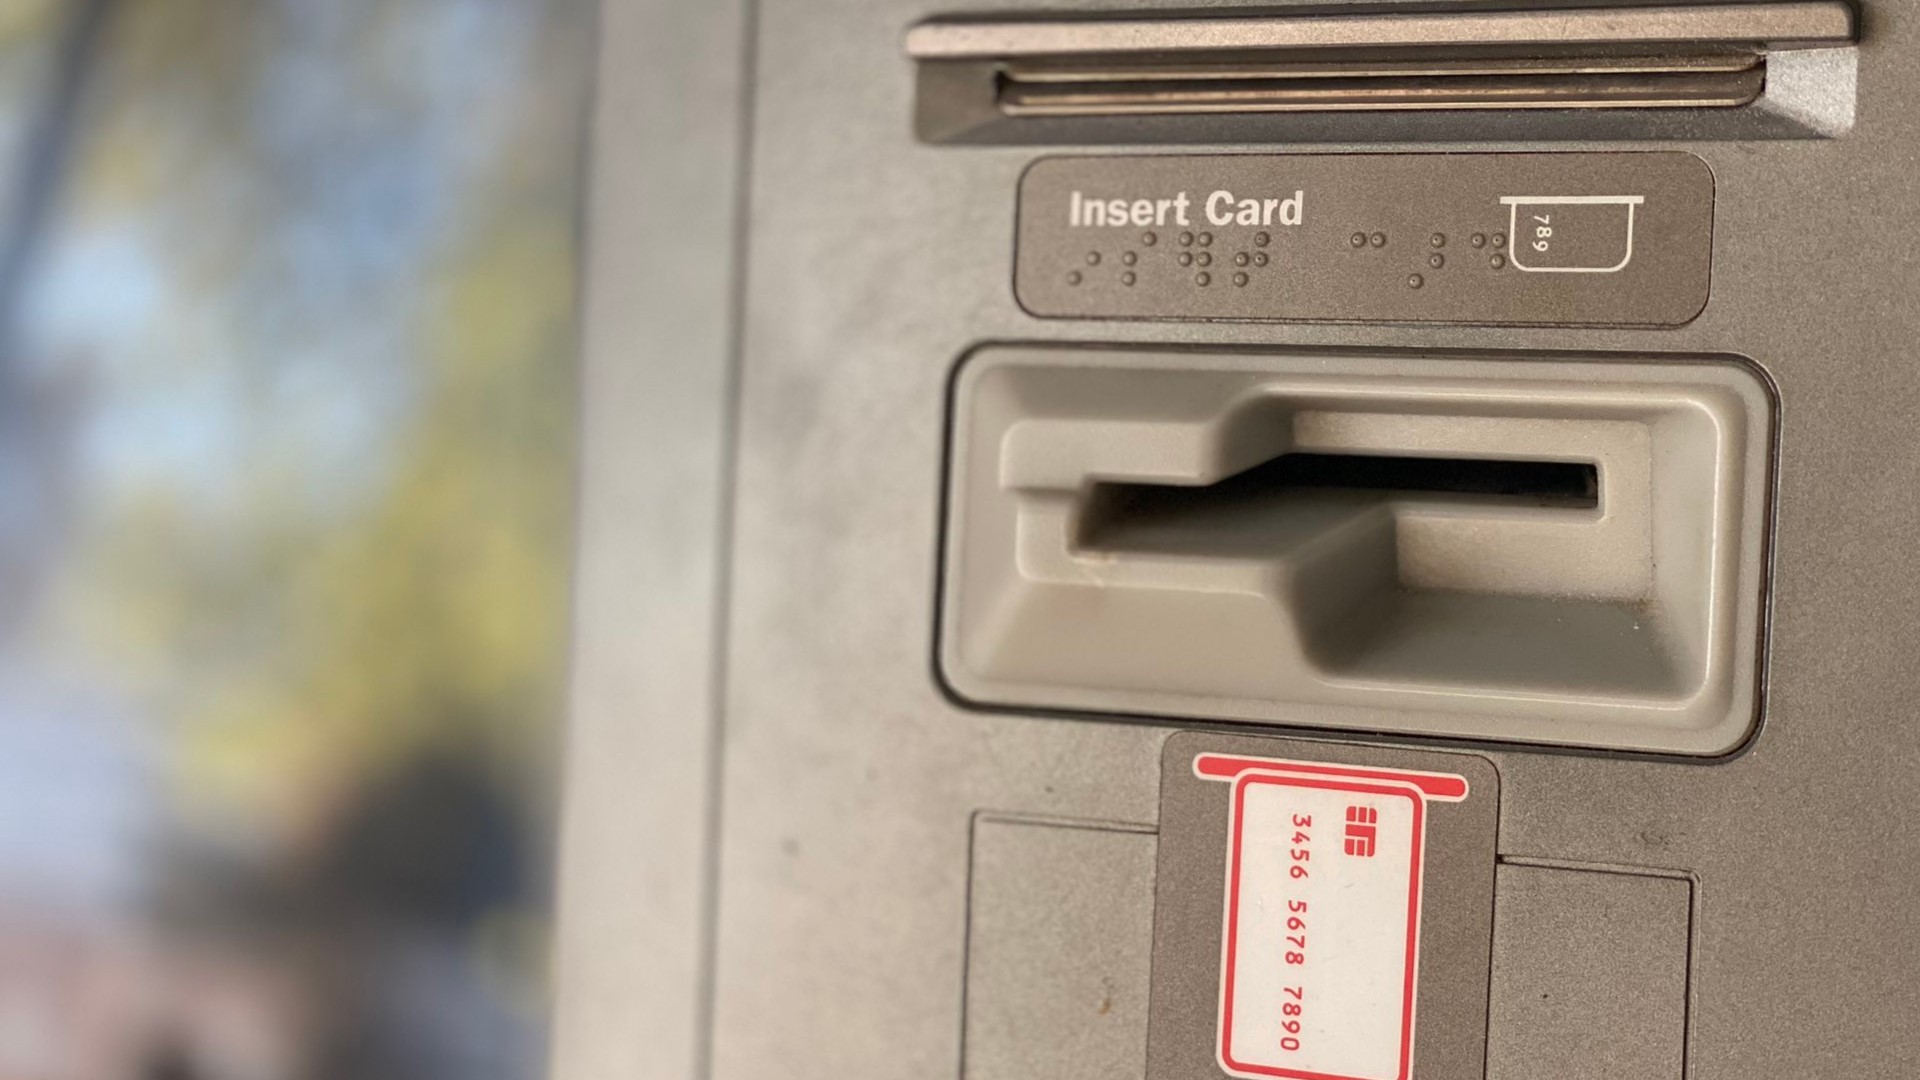 Roseville Police Department is urging community members to check ATM and Point of Sale devices before inserting their cards so they don’t fall victim to the crime.